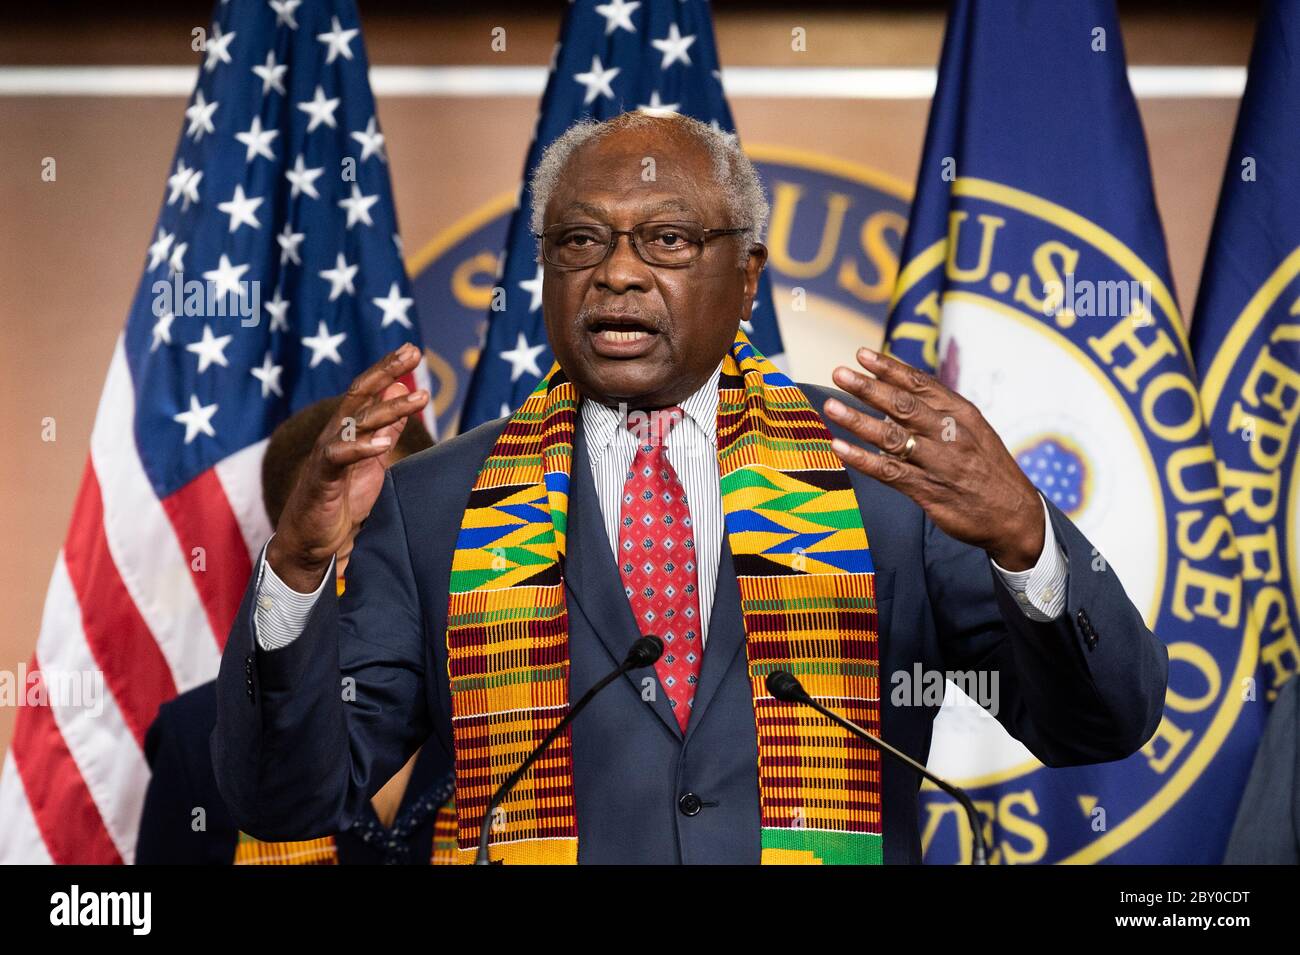 U.S. Representative Jim Clyburn (D-SC)  speaks during a press conference with Congressional Democrats unveiling policing reform and equal justice legislation in Washington. Stock Photo